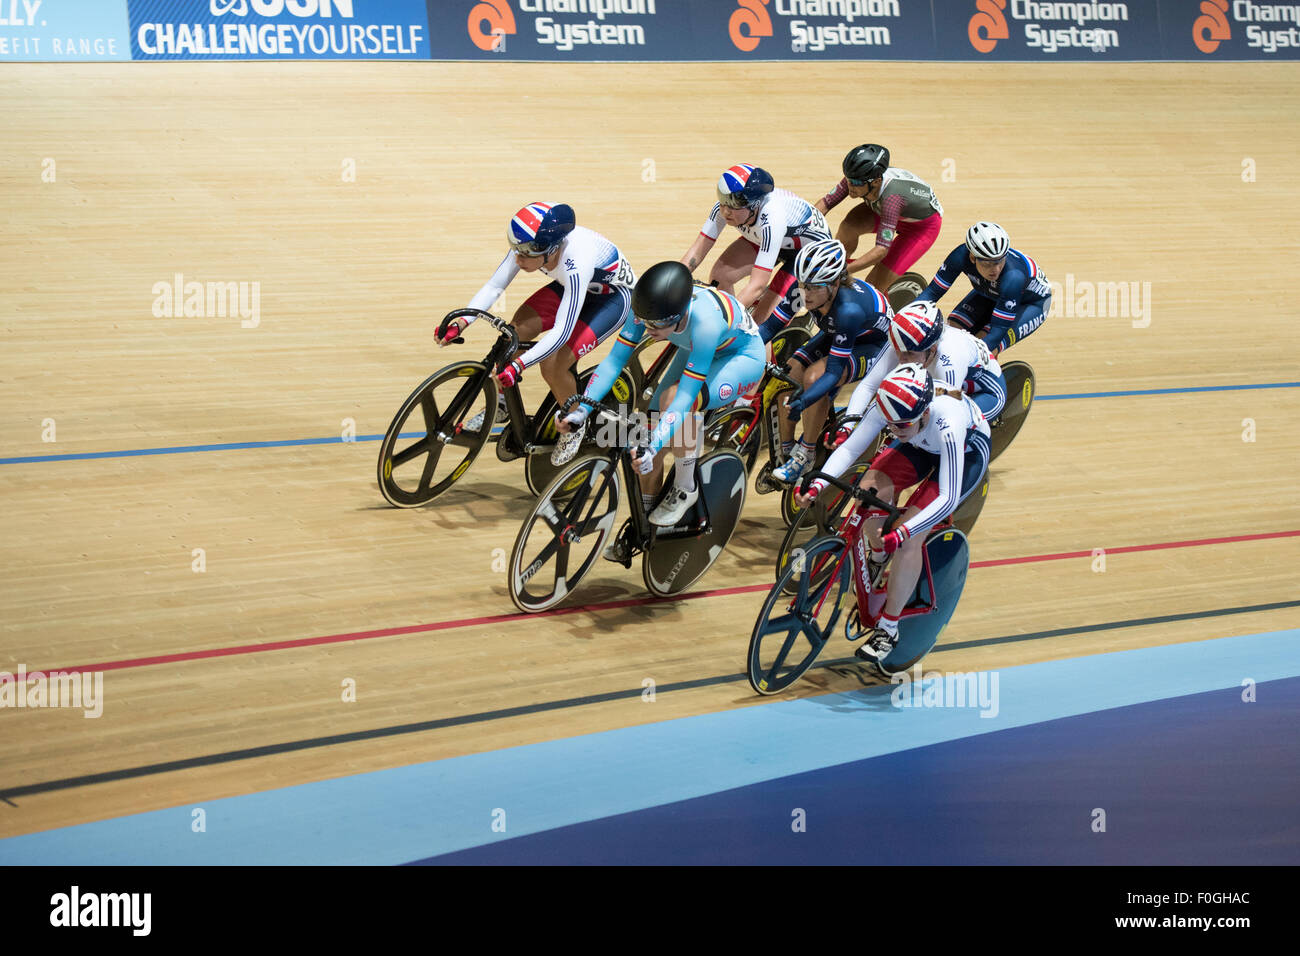 Cyclists compete in the elimination race during the women's omnium competition at the Revolution Series at Derby Arena, Derby, United Kingdom on 15 August 2015. The Revolution Series is a professional track racing series featuring many of the world's best track cyclists. This event, taking place over 3 days from 14-16 August 2015, is an important preparation event for the Rio 2016 Olympic Games, allowing British riders to score qualifying points for the Games. Stock Photo